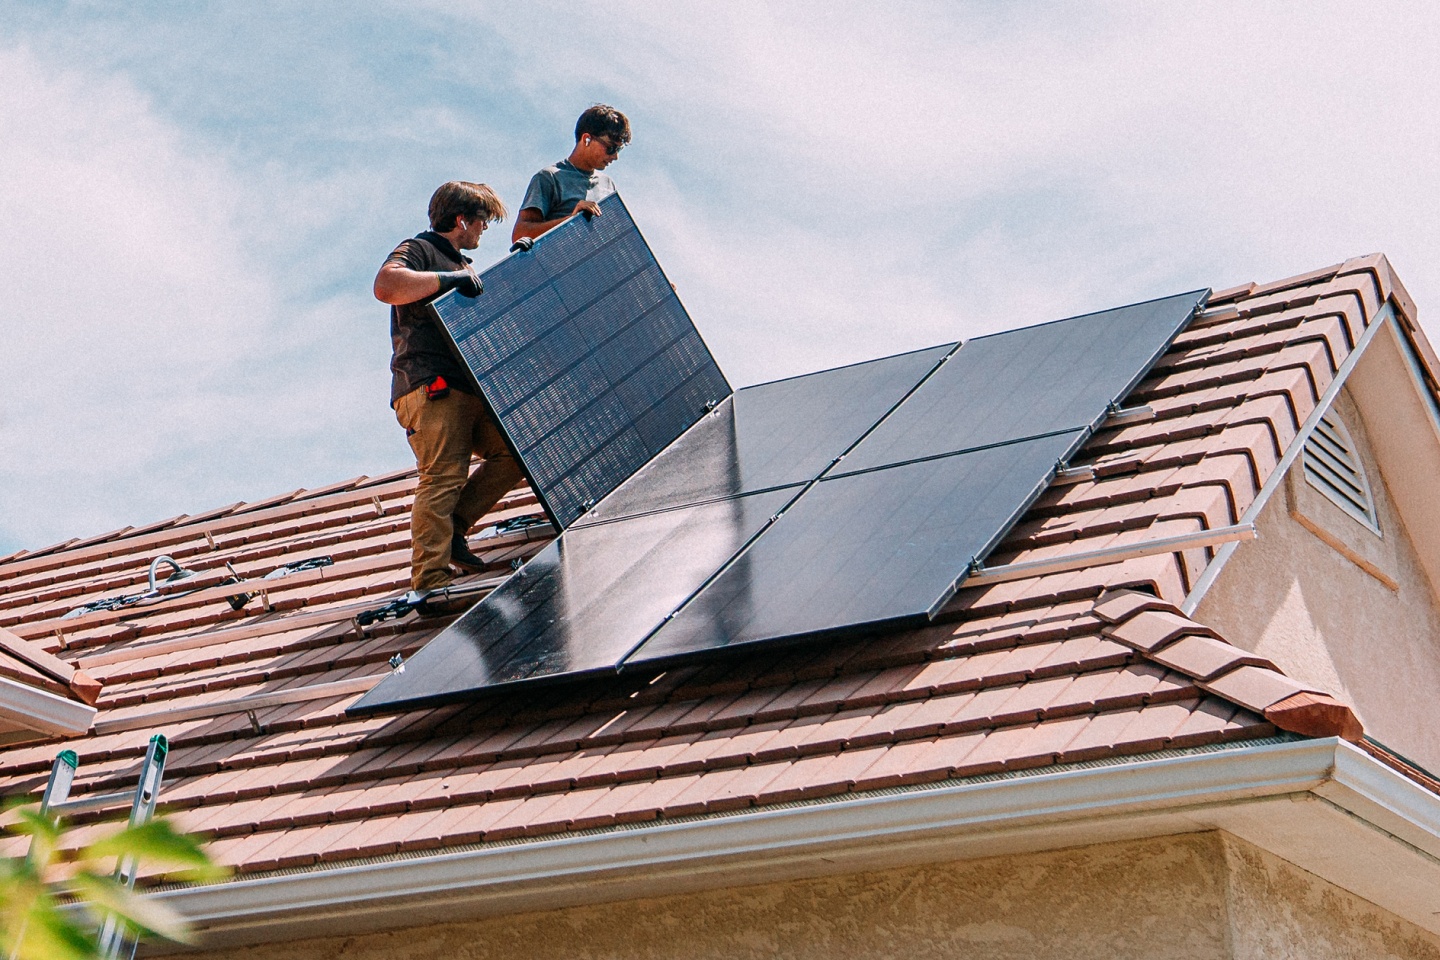 Tradesmen working installing solar panels on a house in Australia